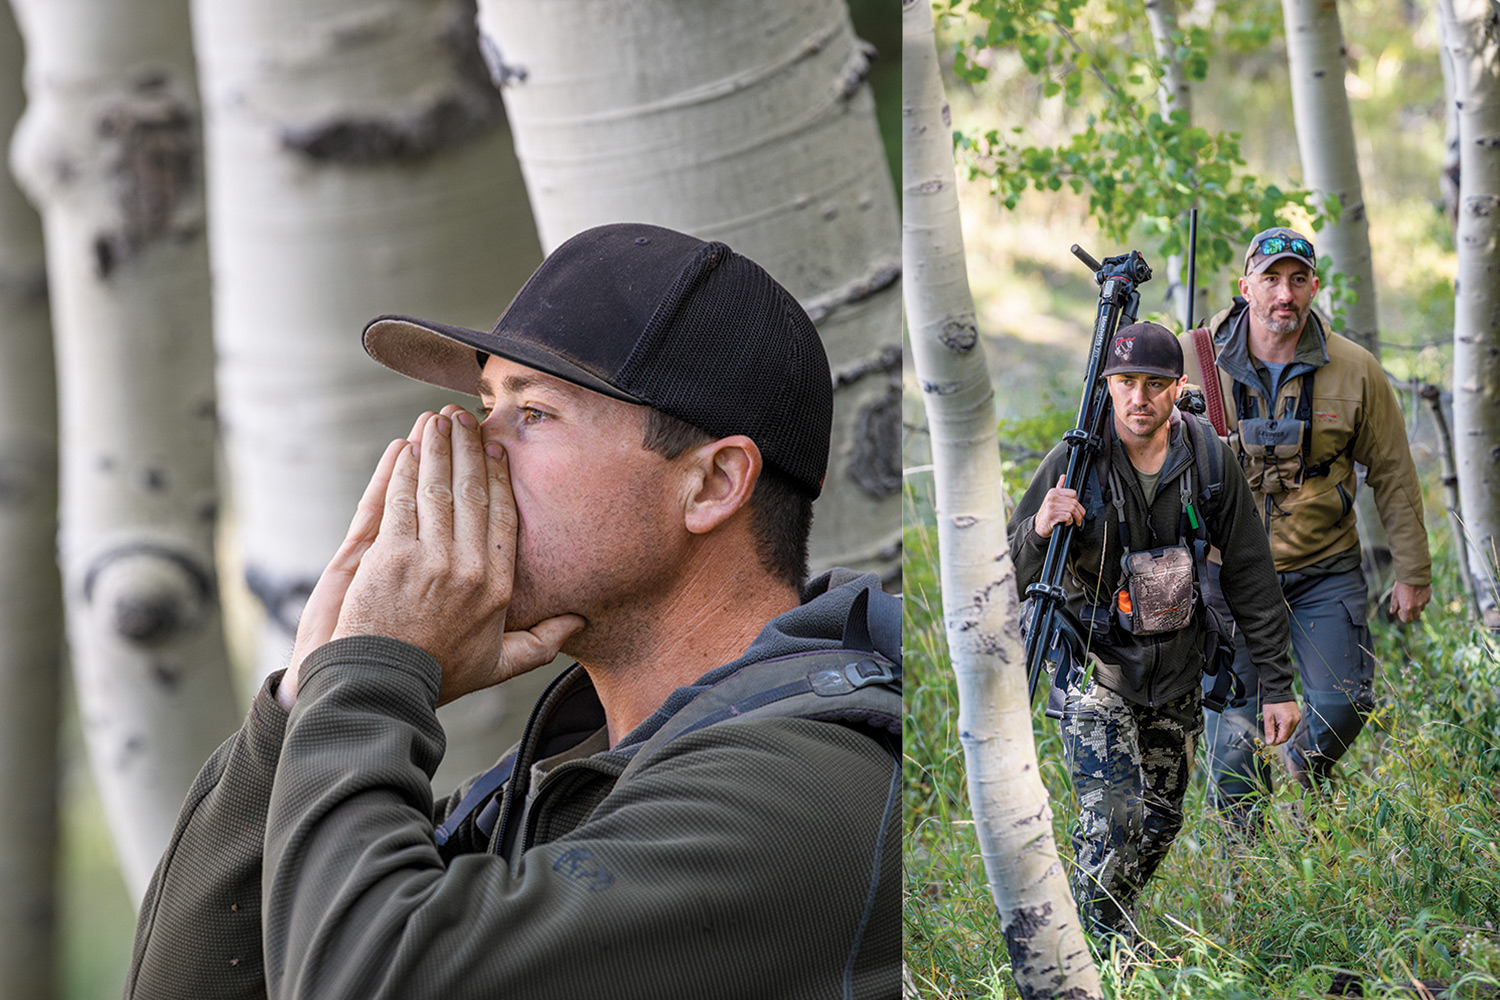 Hunting guide cups hands around mouth to make moose call; hunter and guide hike through trees carrying tripod and rifle.